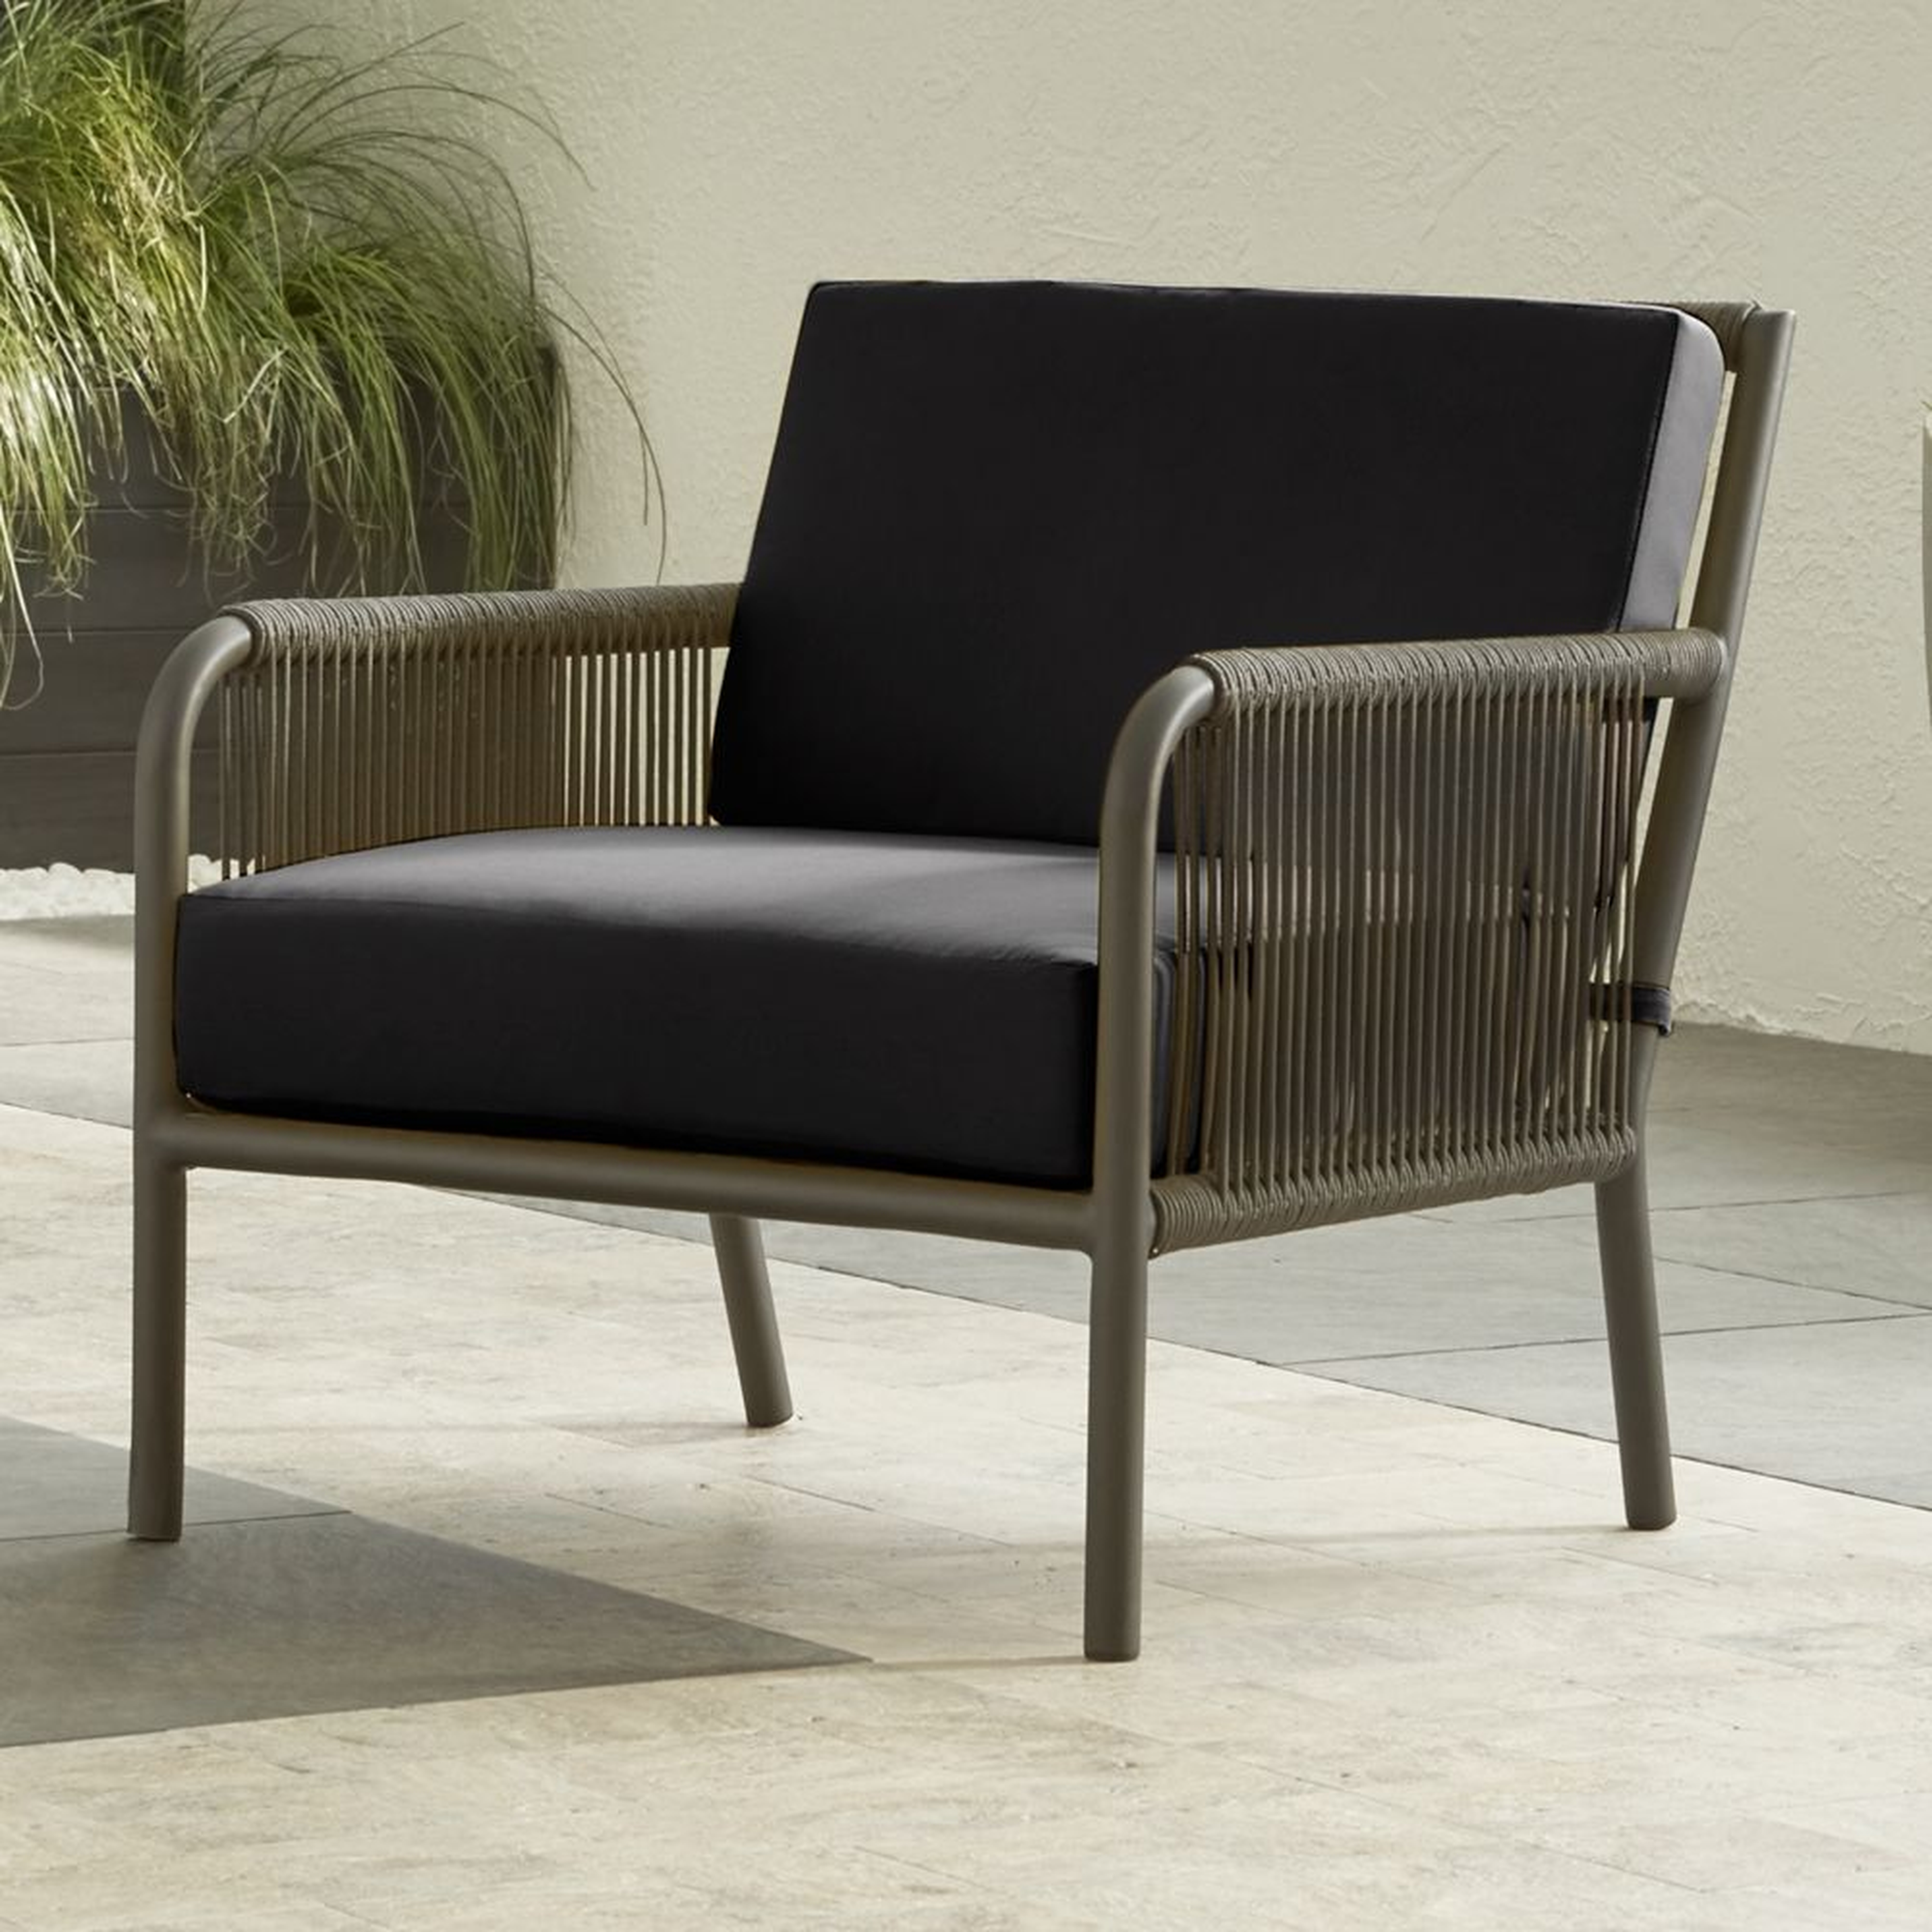 Morocco Graphite Outdoor Lounge Chair with Charcoal Sunbrella ® Cushion - Crate and Barrel